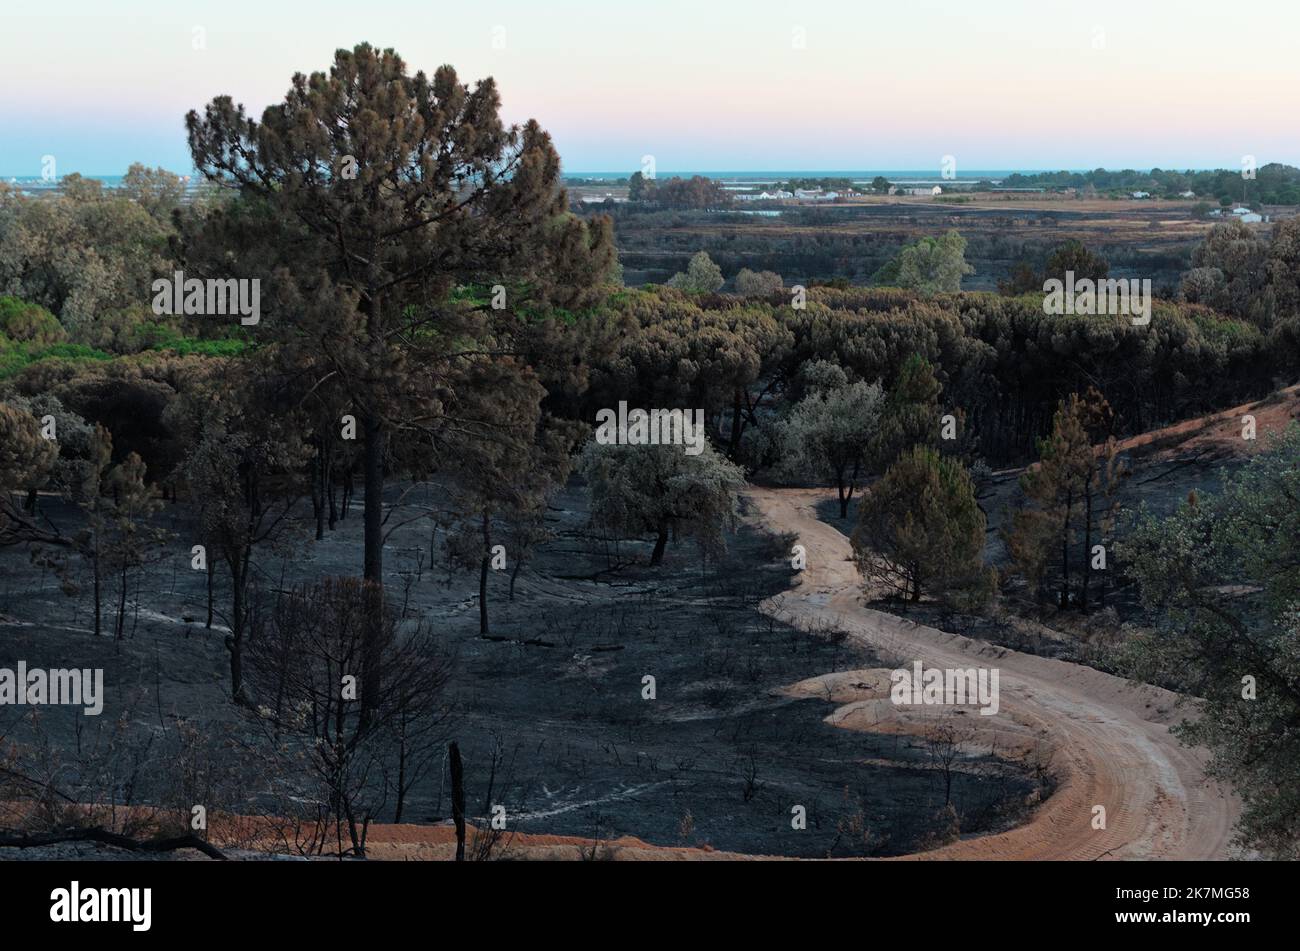 Aftermath of the wildfire of July 2022 in Ludo, Ria Formosa Natural Reserve. A Fire that spread to Quinta do Lago affecting it severely. Algarve, Portugal Stock Photo